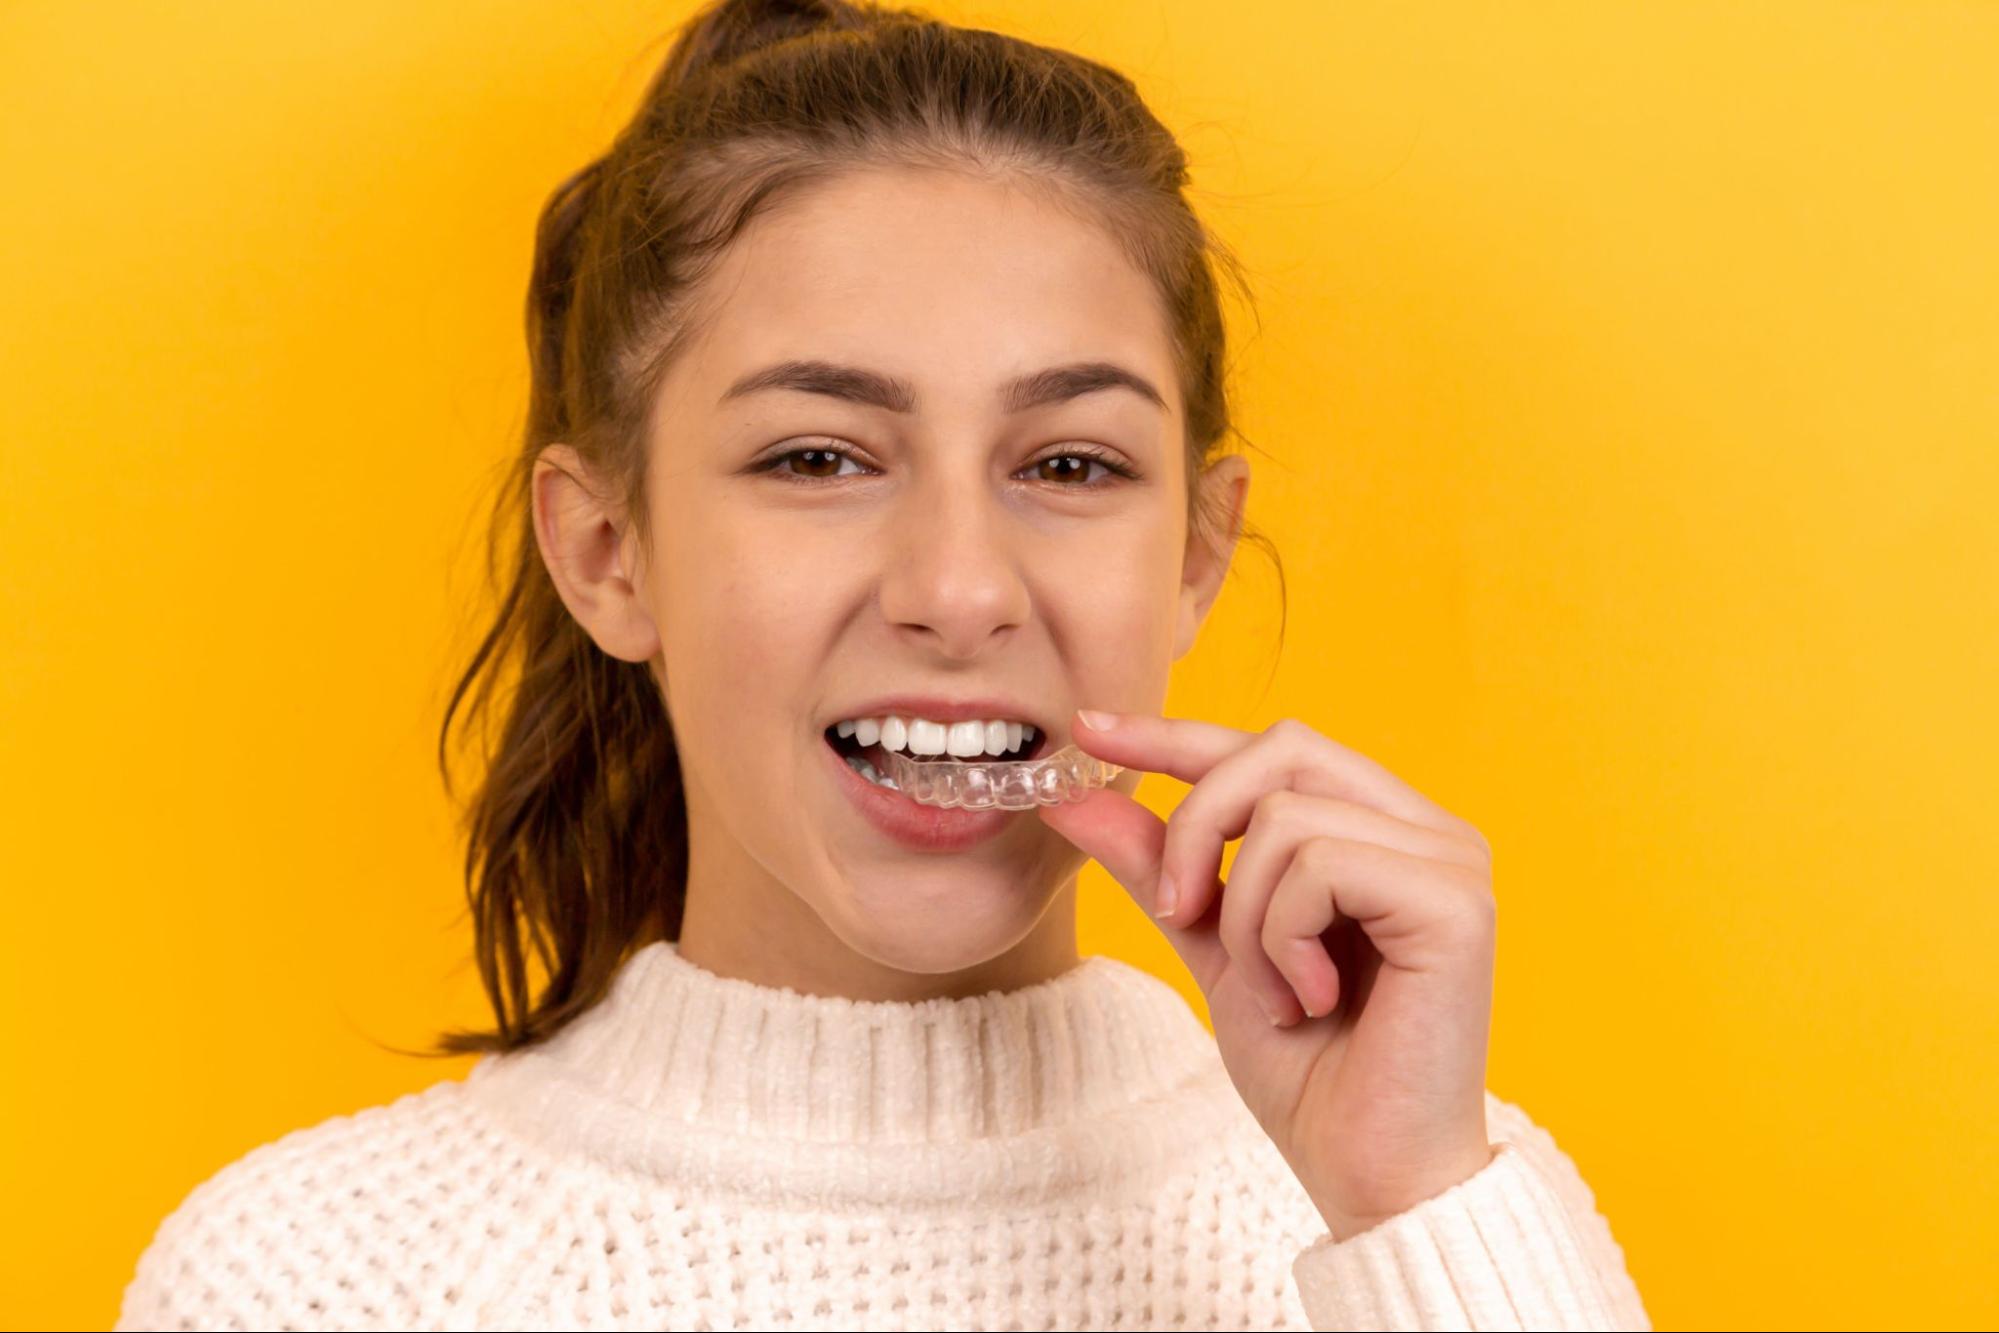 Braces or Clear Aligners? The Choice Involves More than Appearance